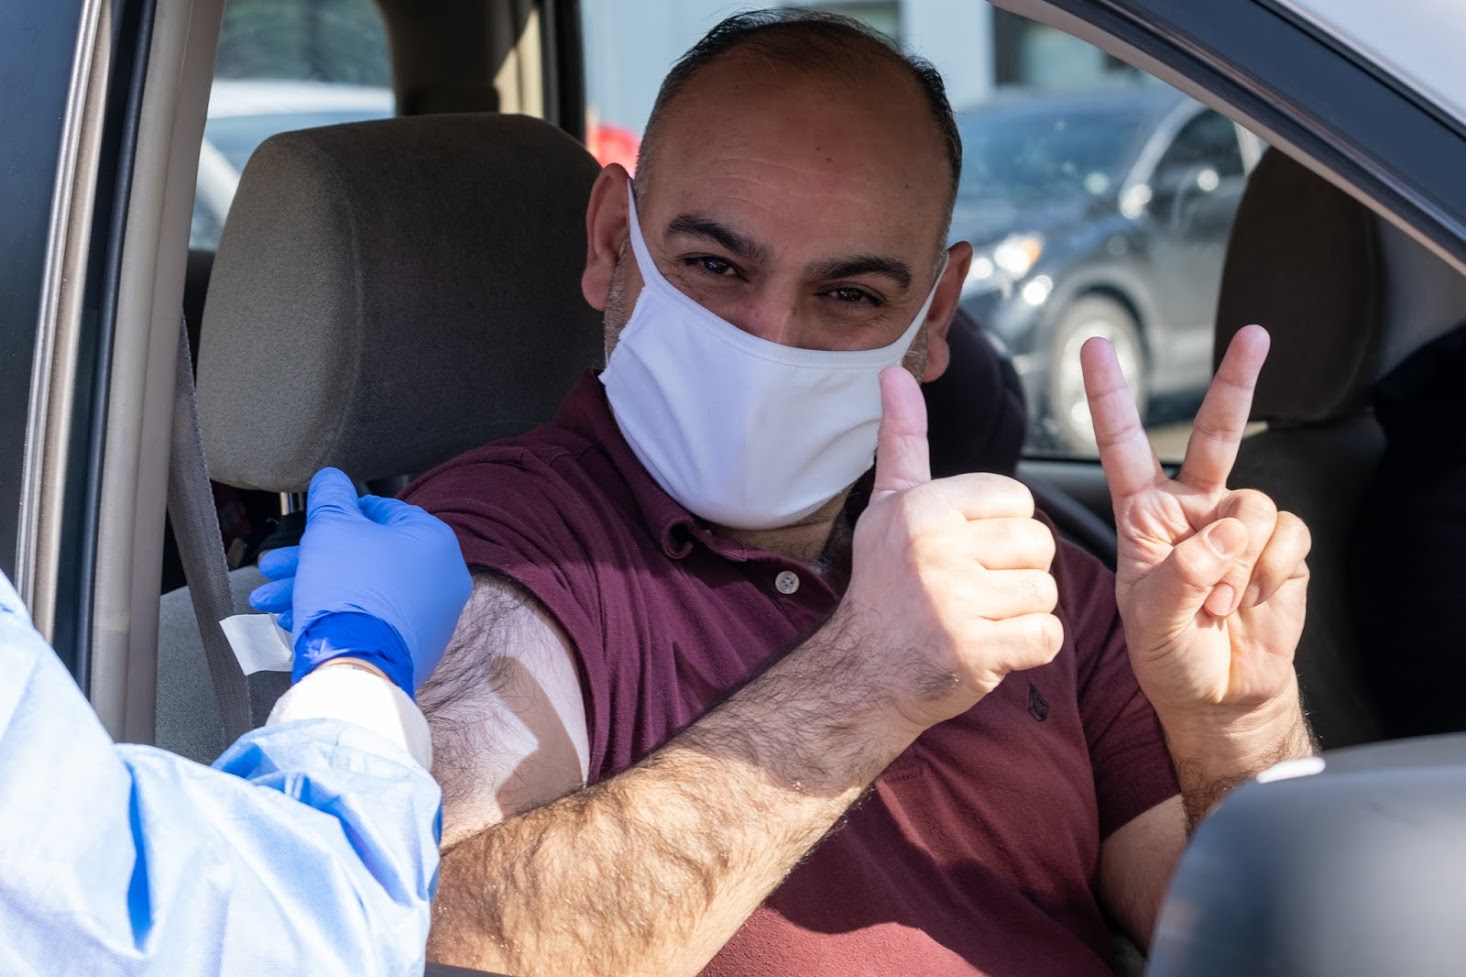 A vaccination patient in his car and wearing a white mask raises both thumbs after getting vaccinated by a medical worker